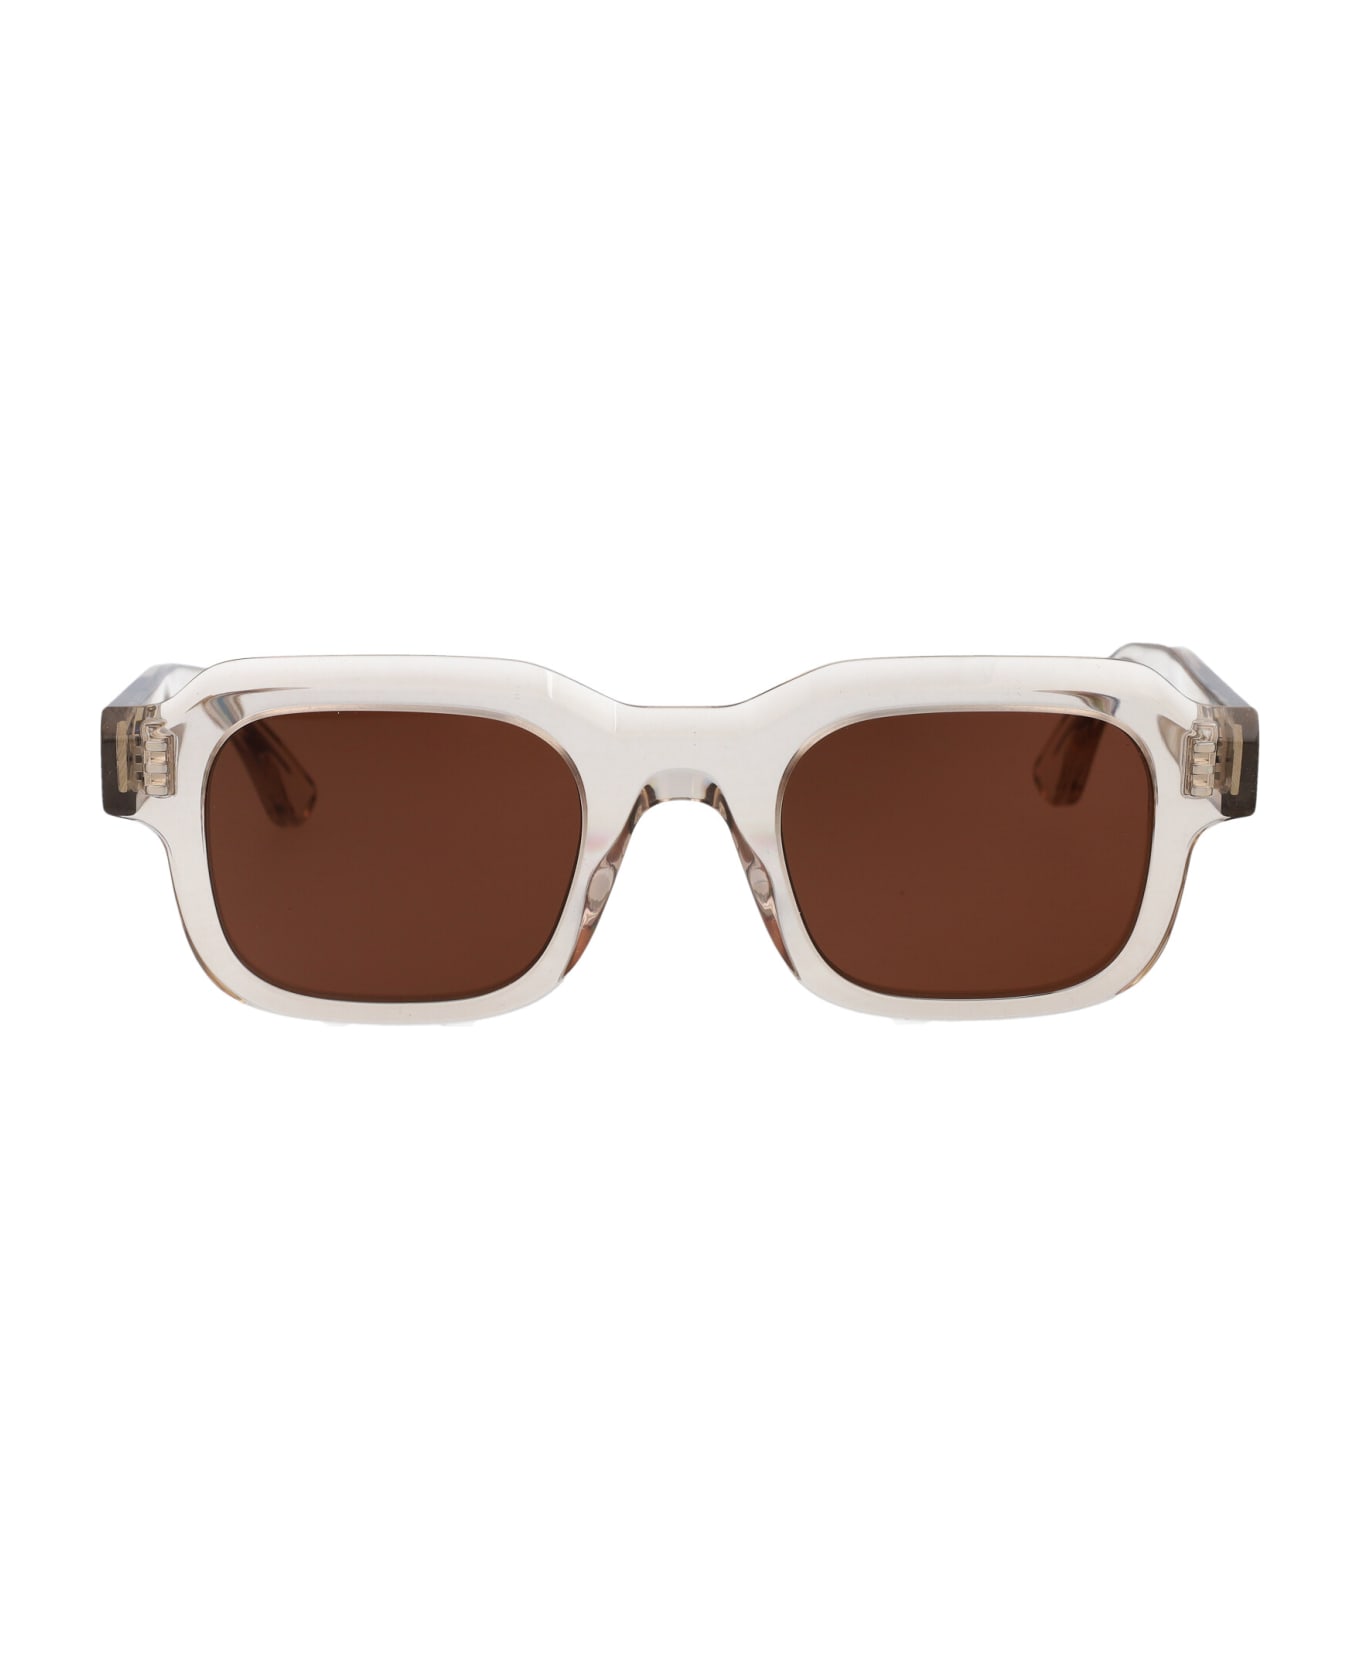 Thierry Lasry Vendetty Sunglasses - 2882 SAND